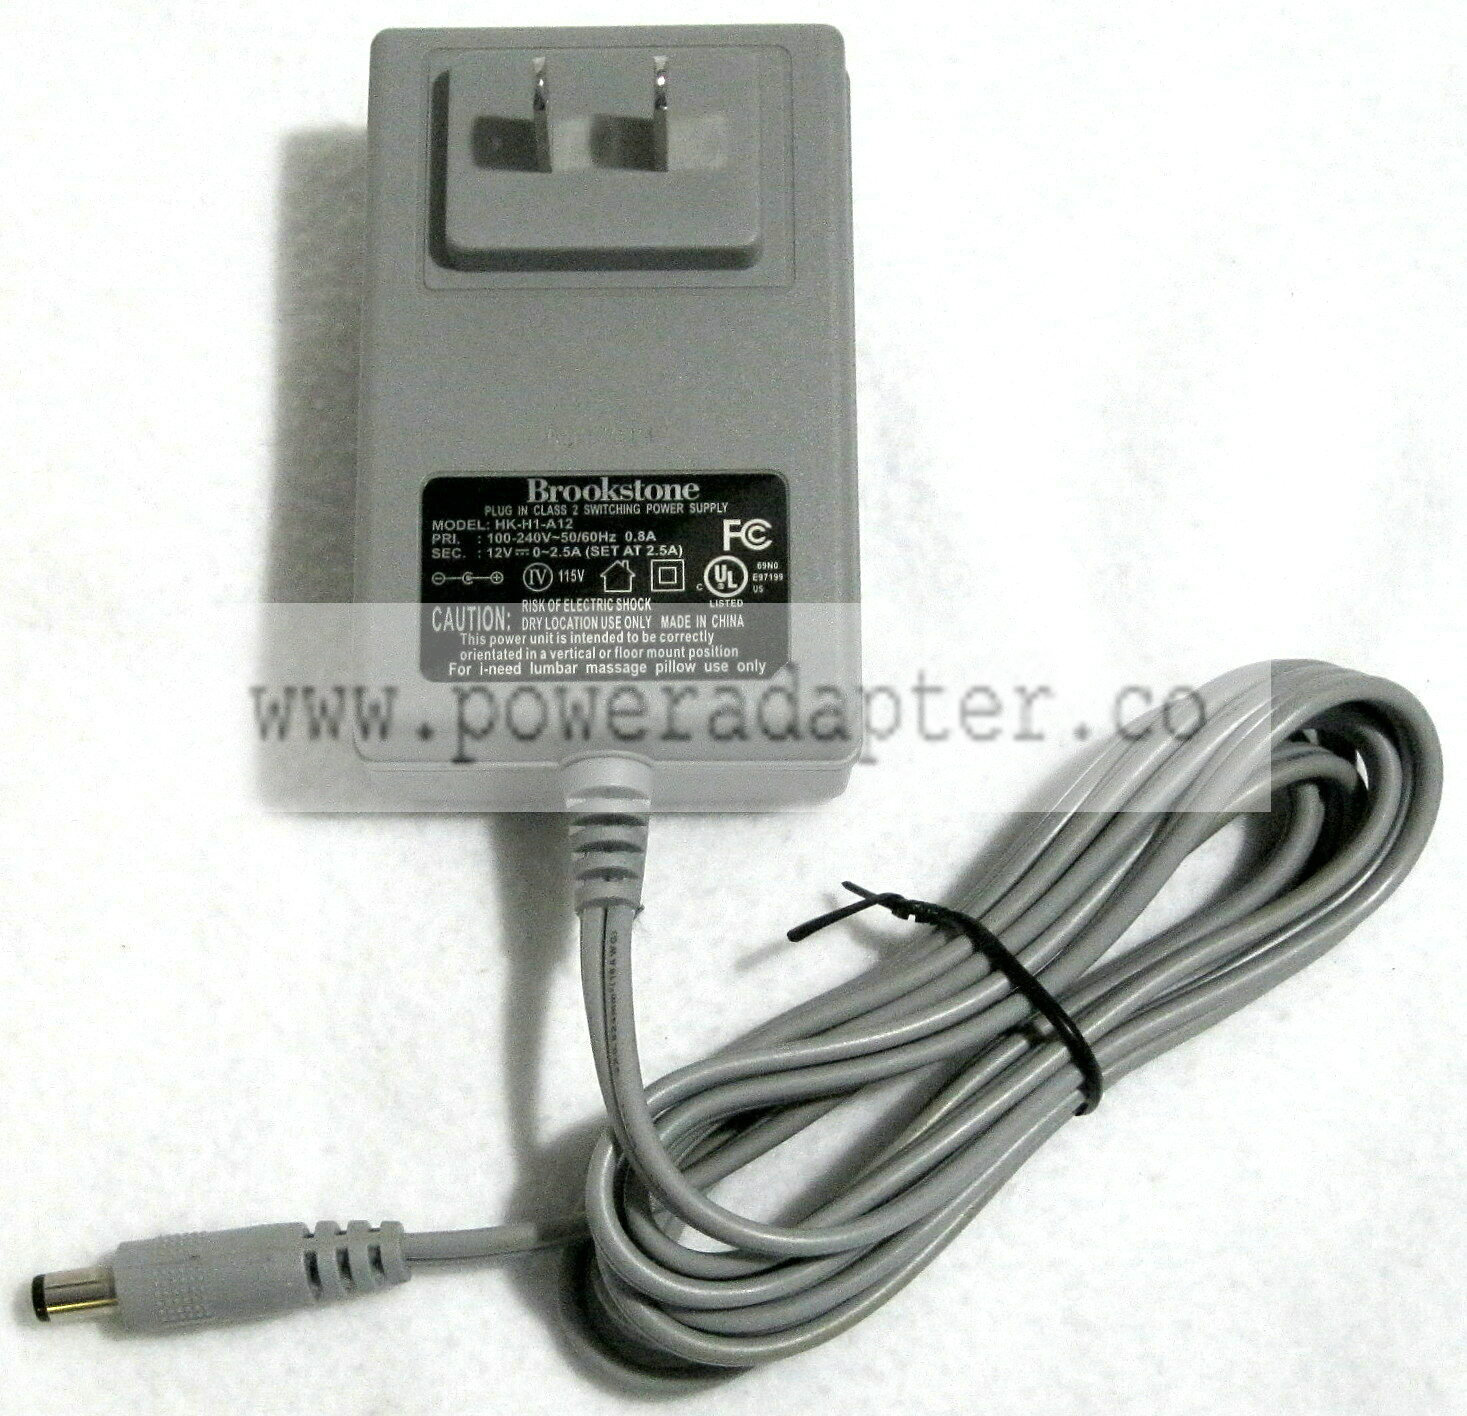 Brookstone HK-H1-A12 Power Supply AC DC Adapter 12V 0-2.5A EXCELLENT - TESTED Model: HK-H1-A12 Brand: Brookstone T - Click Image to Close